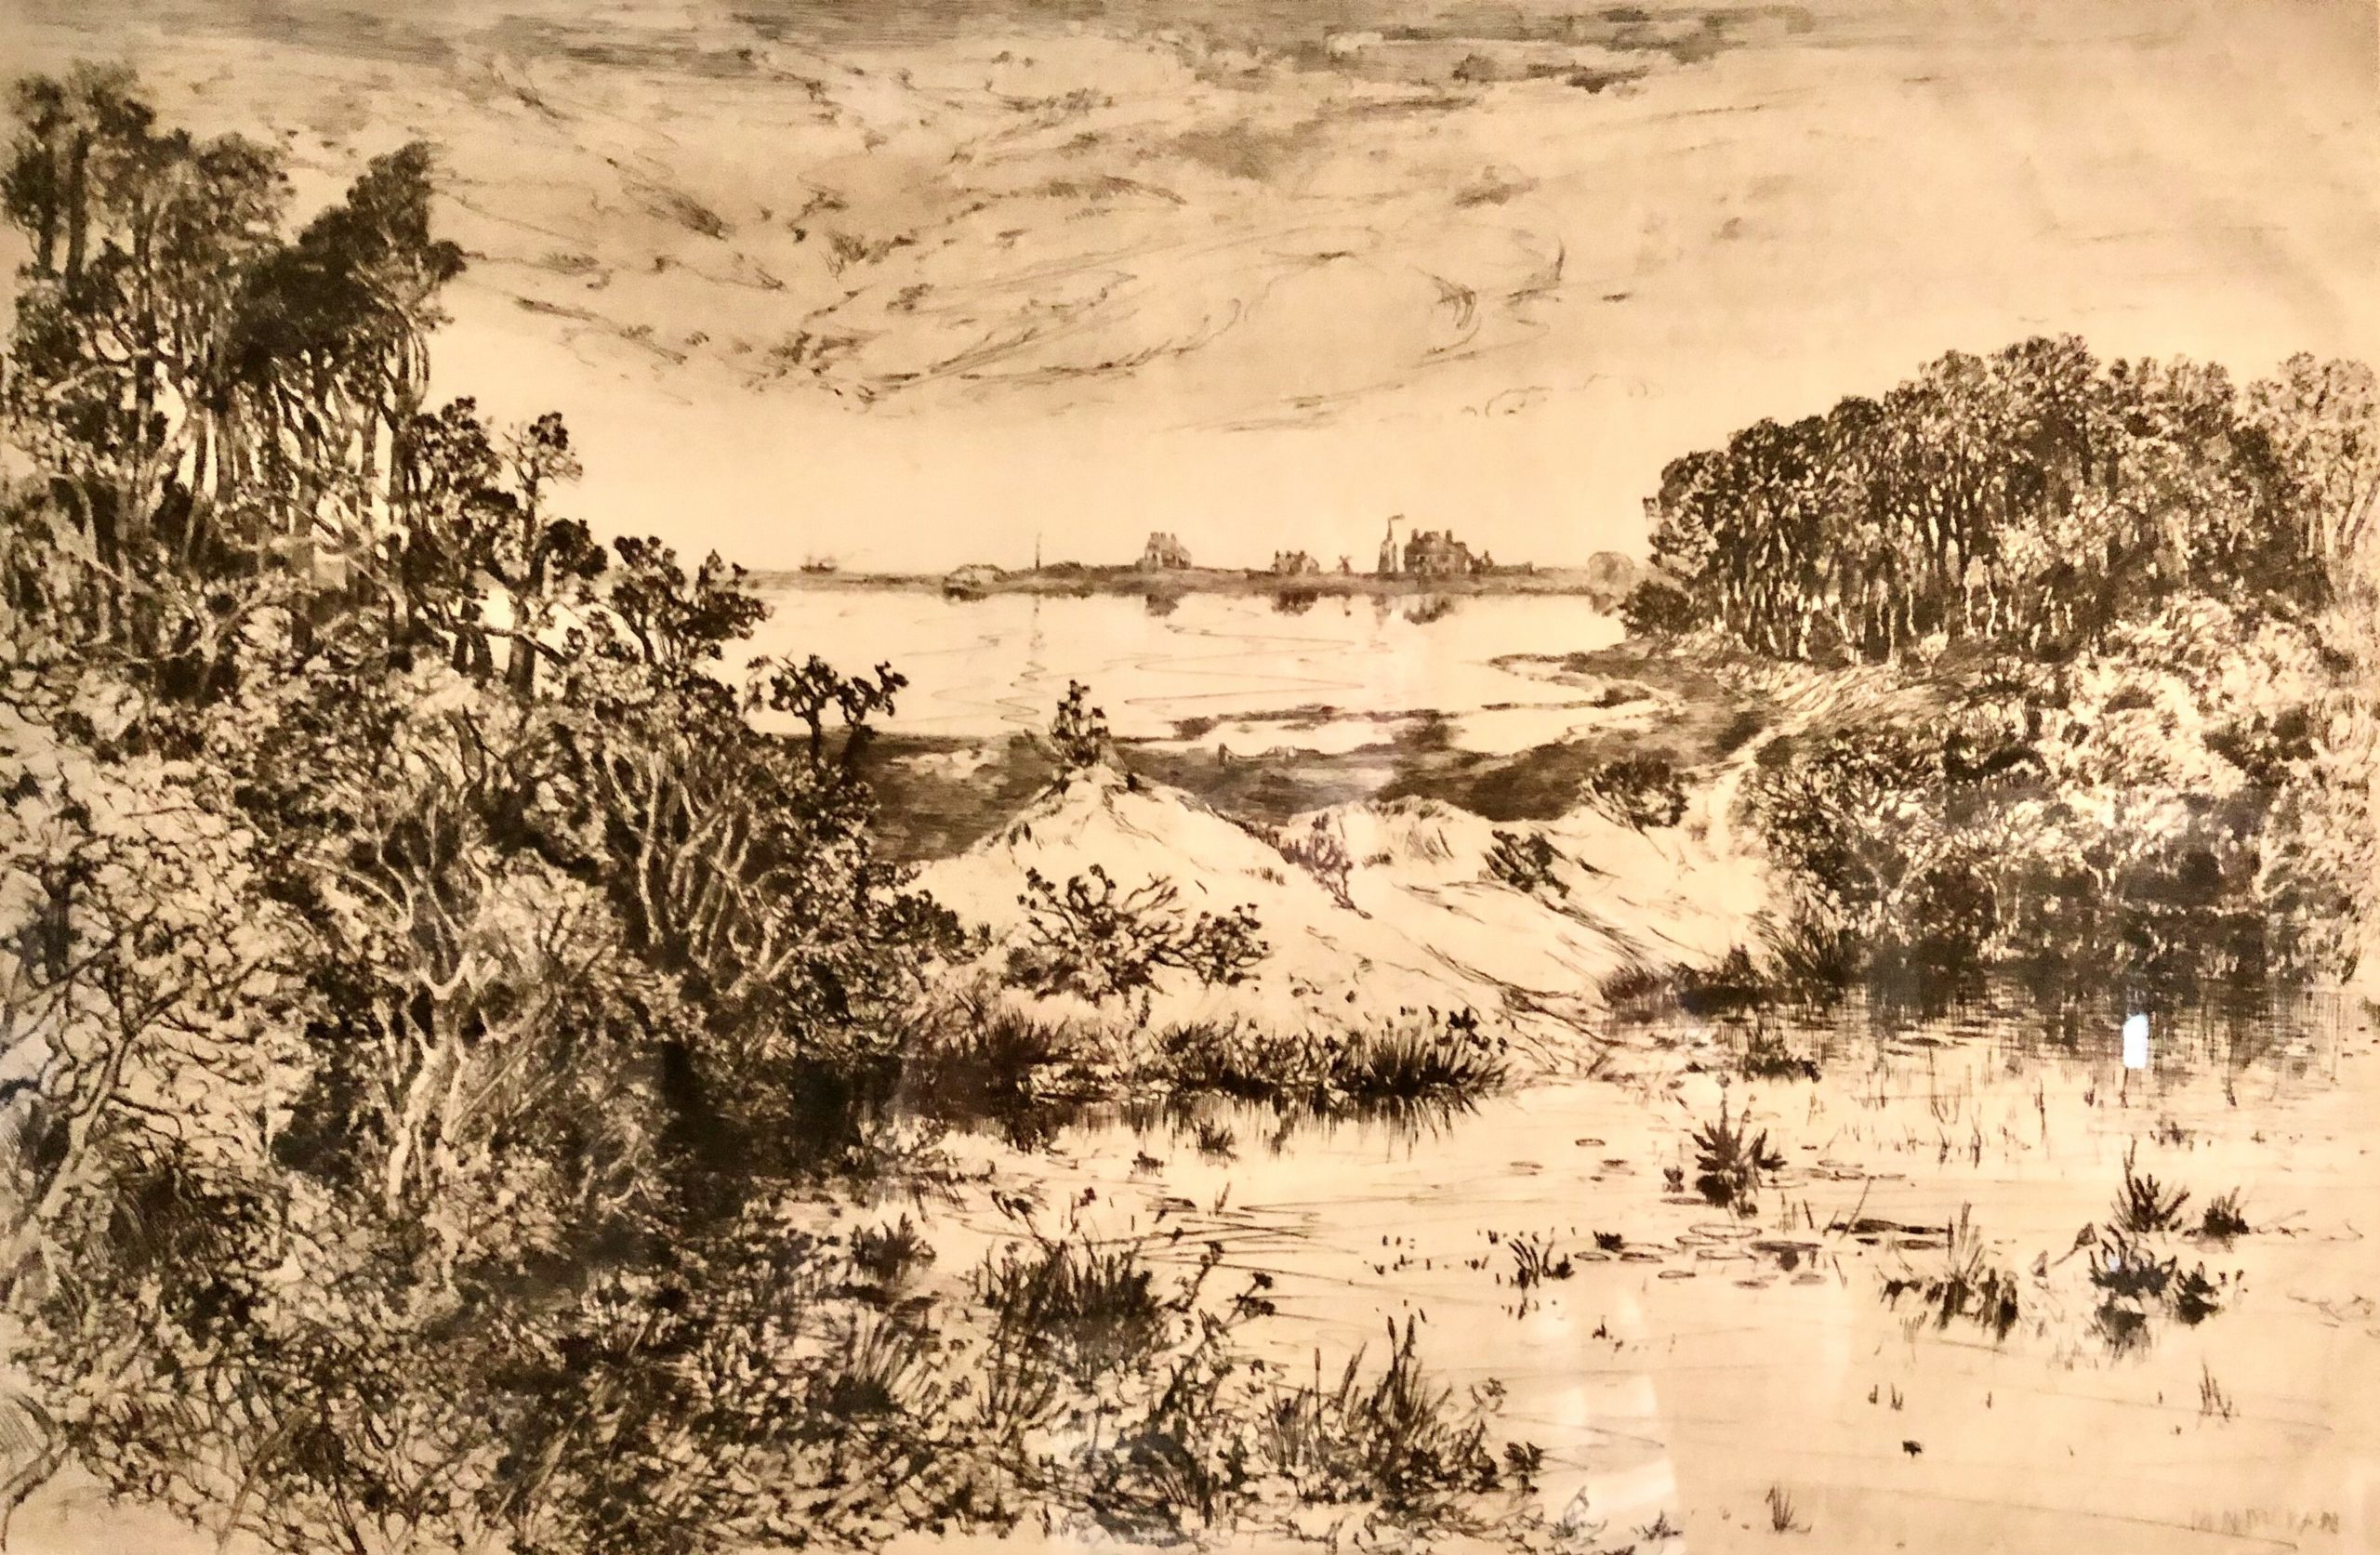 Mary Nimmo Moran, “Georgica Pond: Looking Seaward,” 1885, etching on paper. East Hampton Library, Thomas Moran Biographical Collection.